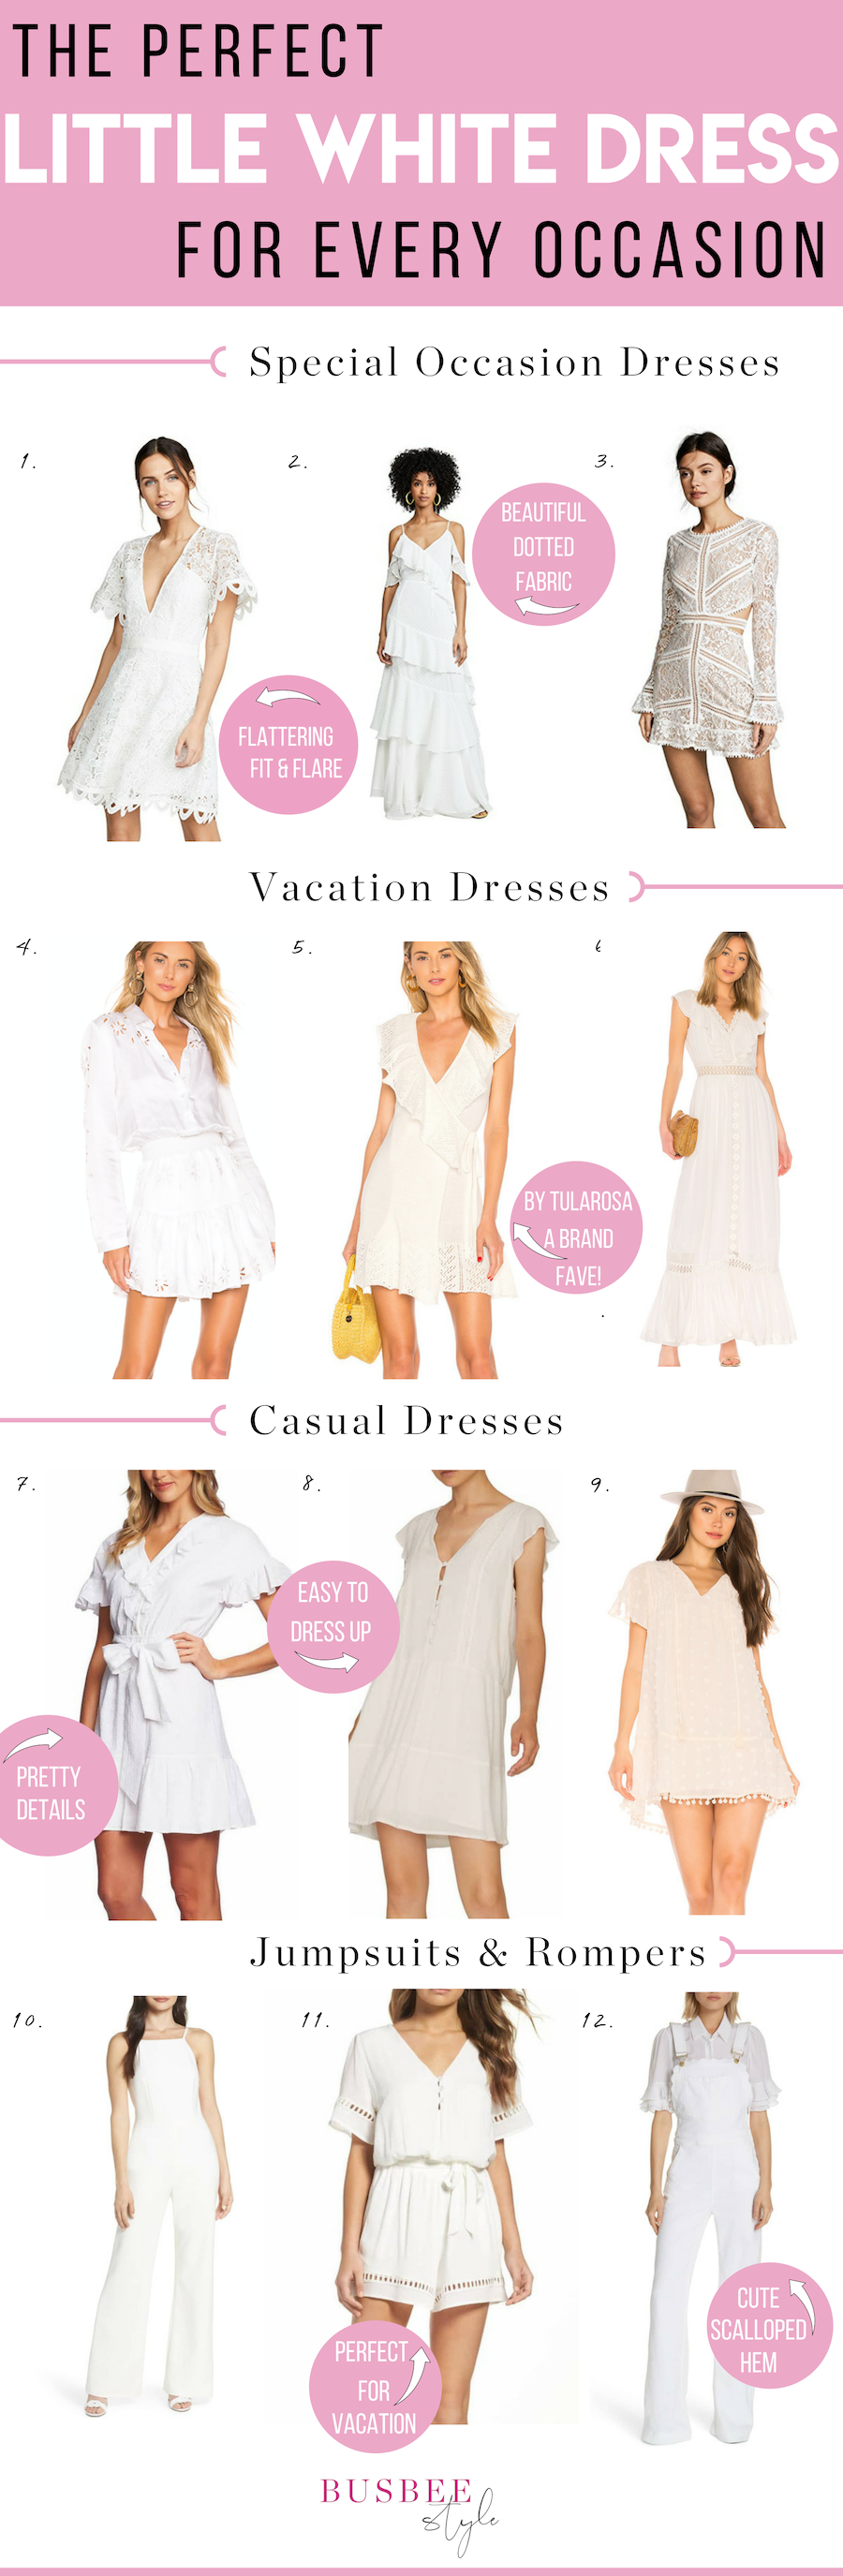 Need The Perfect Little White Dress? I Have You Covered!